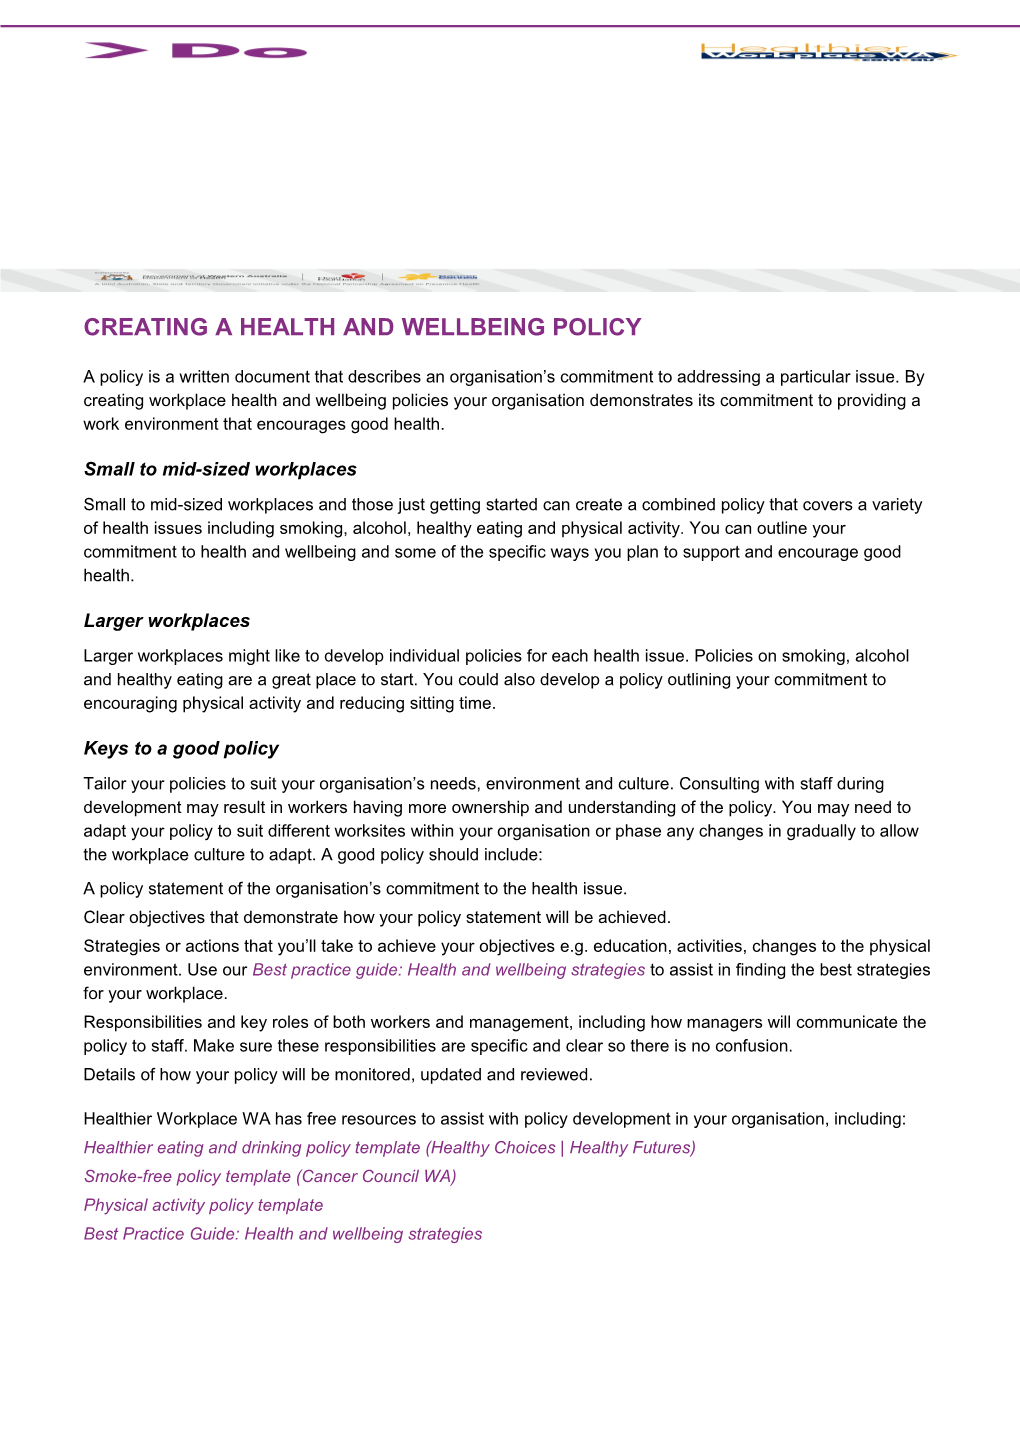 Creating a Health and Wellbeing Policy